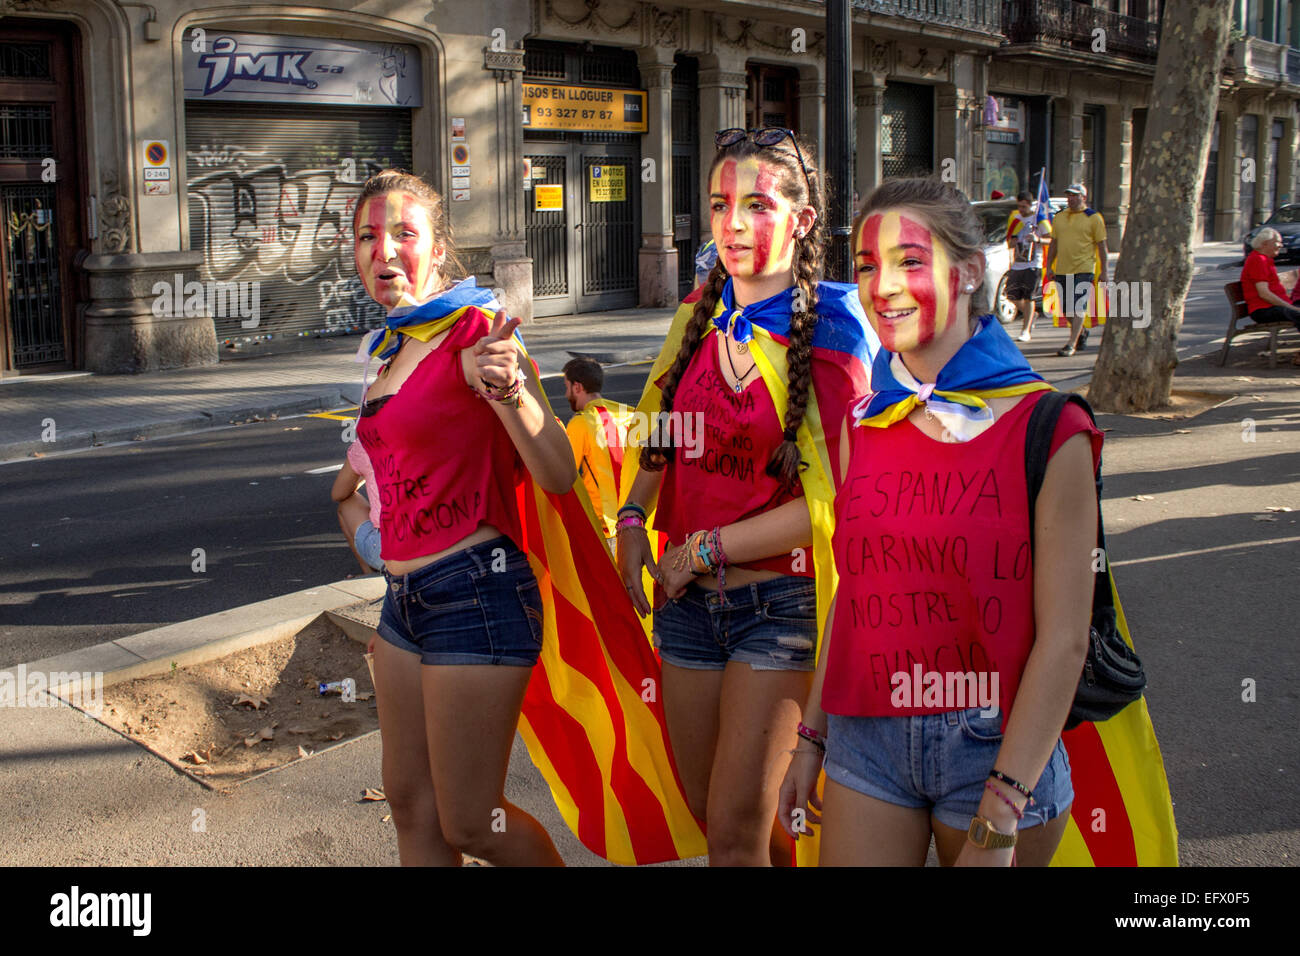 BARCELONA, SPAIN - SEPT. 11: People celebrating independence on the street of Barcelona during the National Day of Cataloniag th Stock Photo